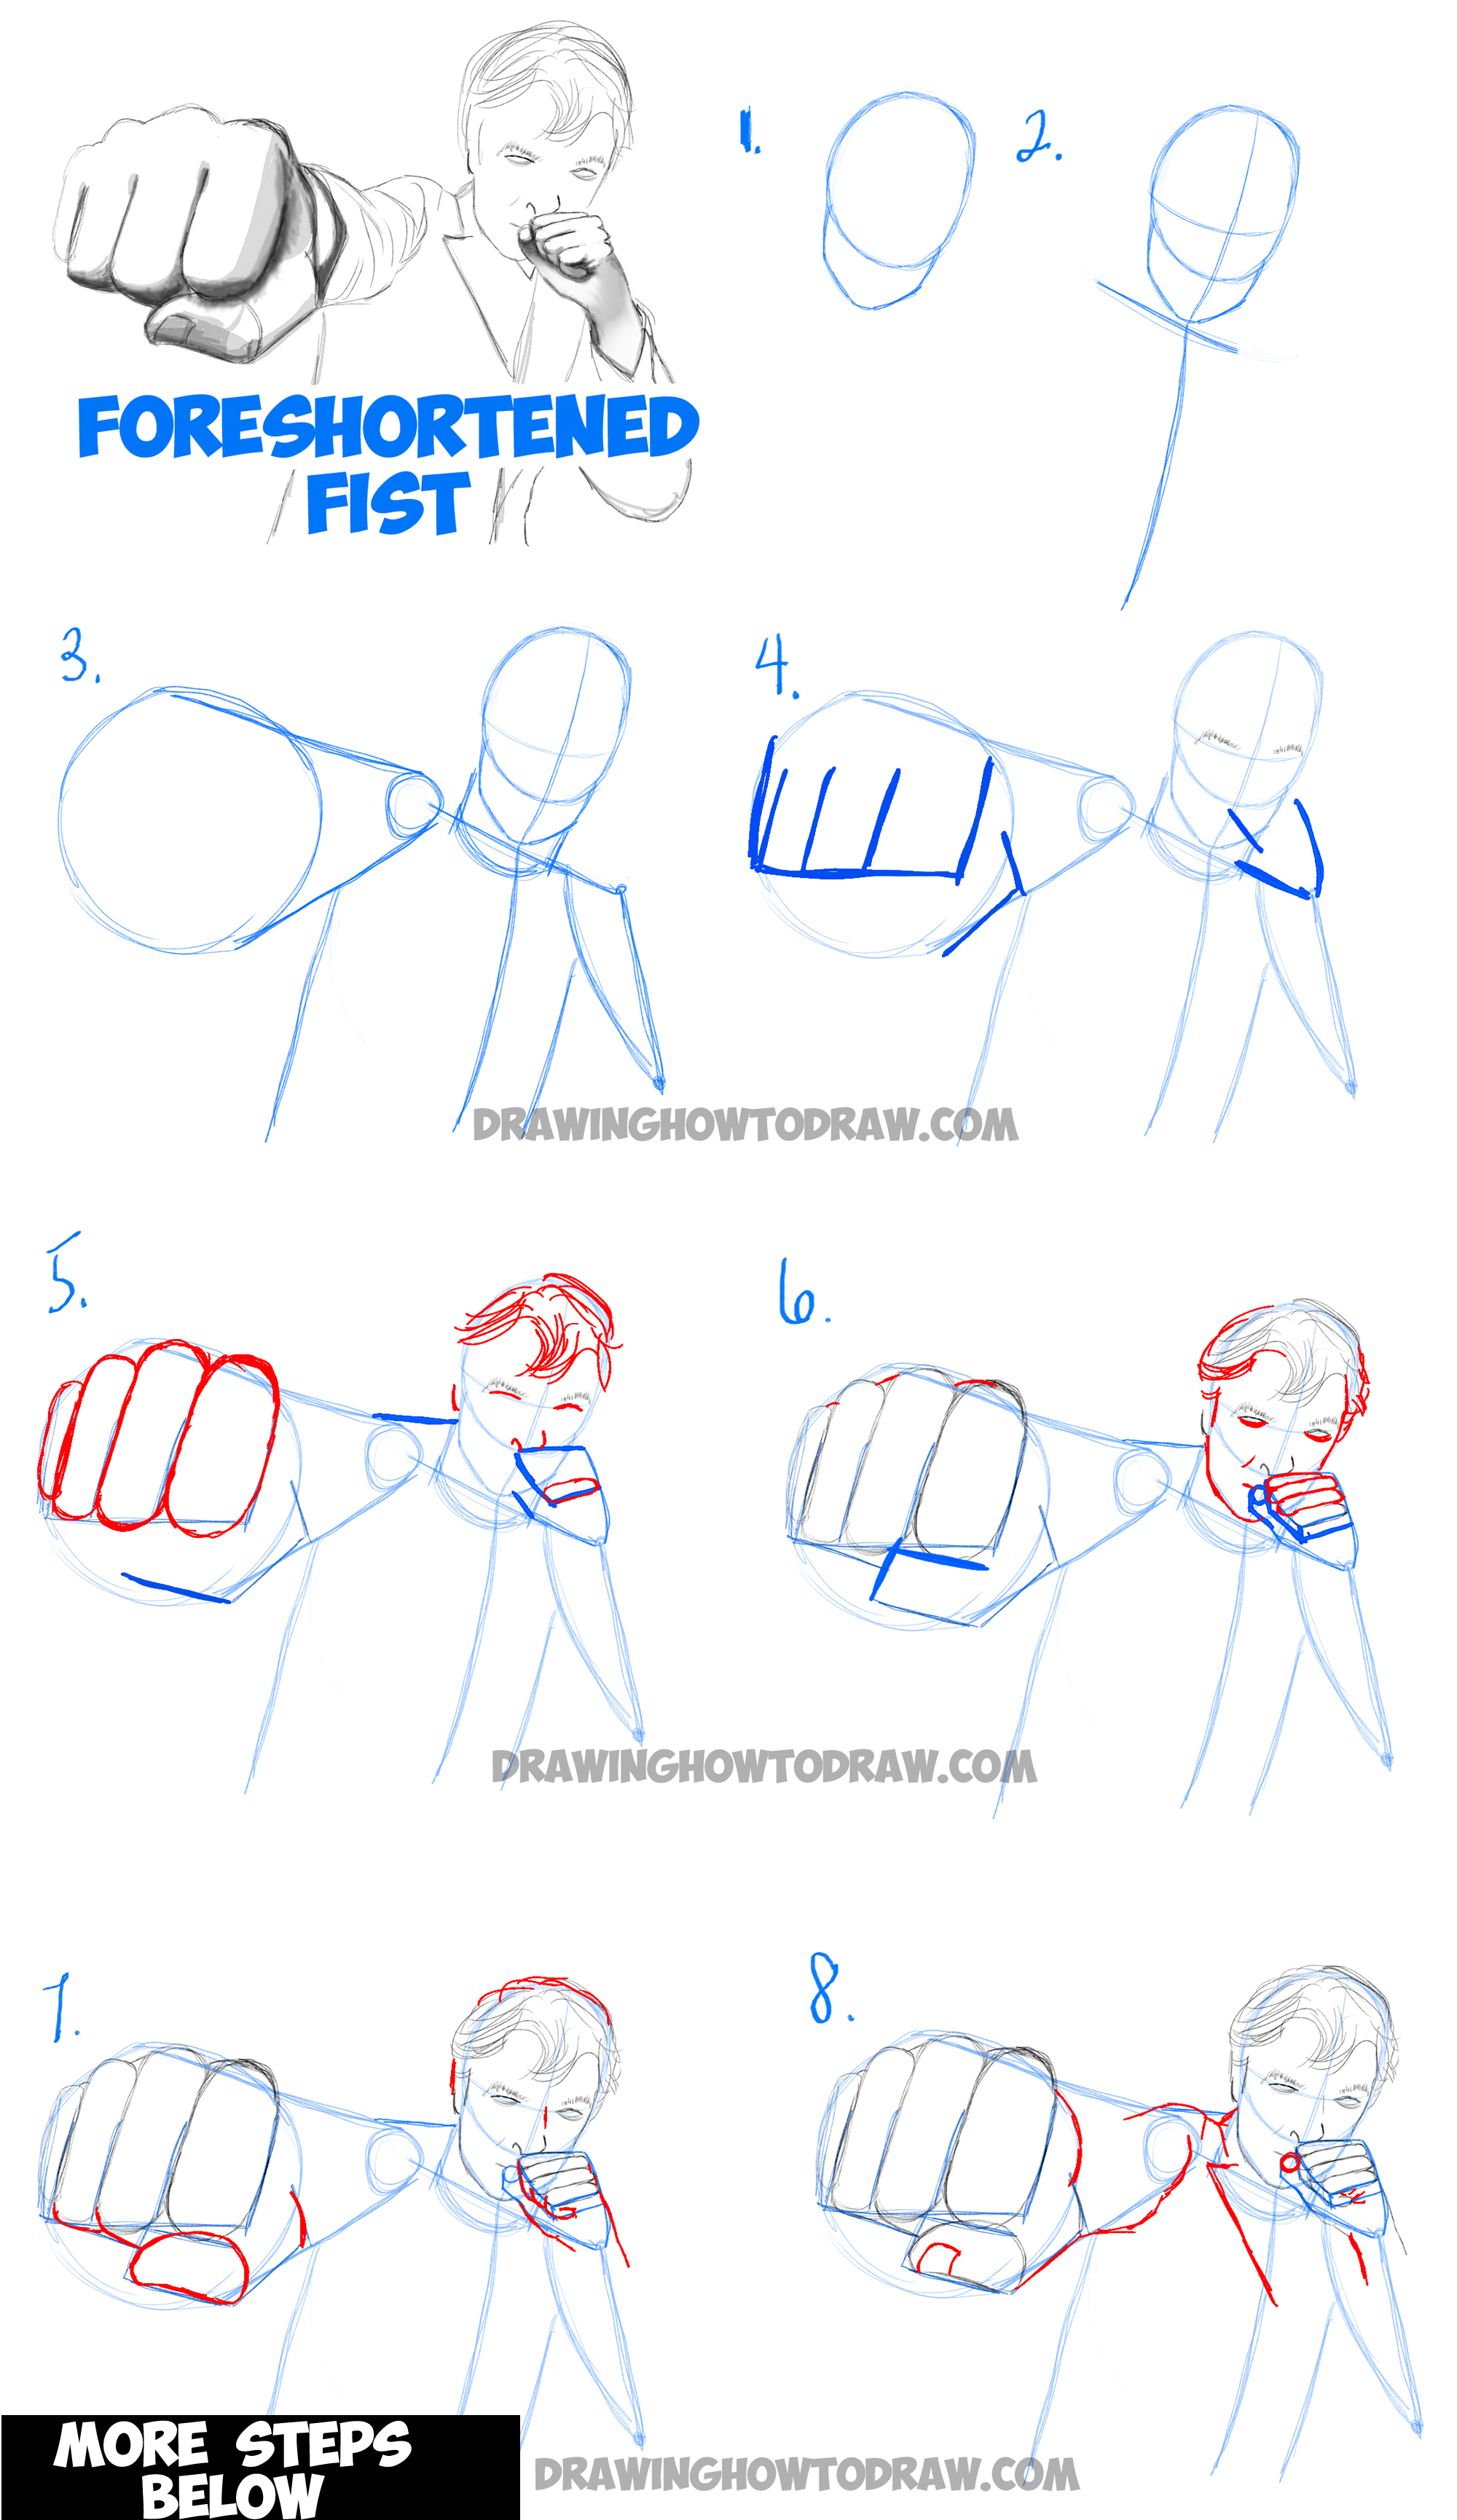 Learn How to Draw Foreshortened Fists : Step by Step Drawing Tutorial